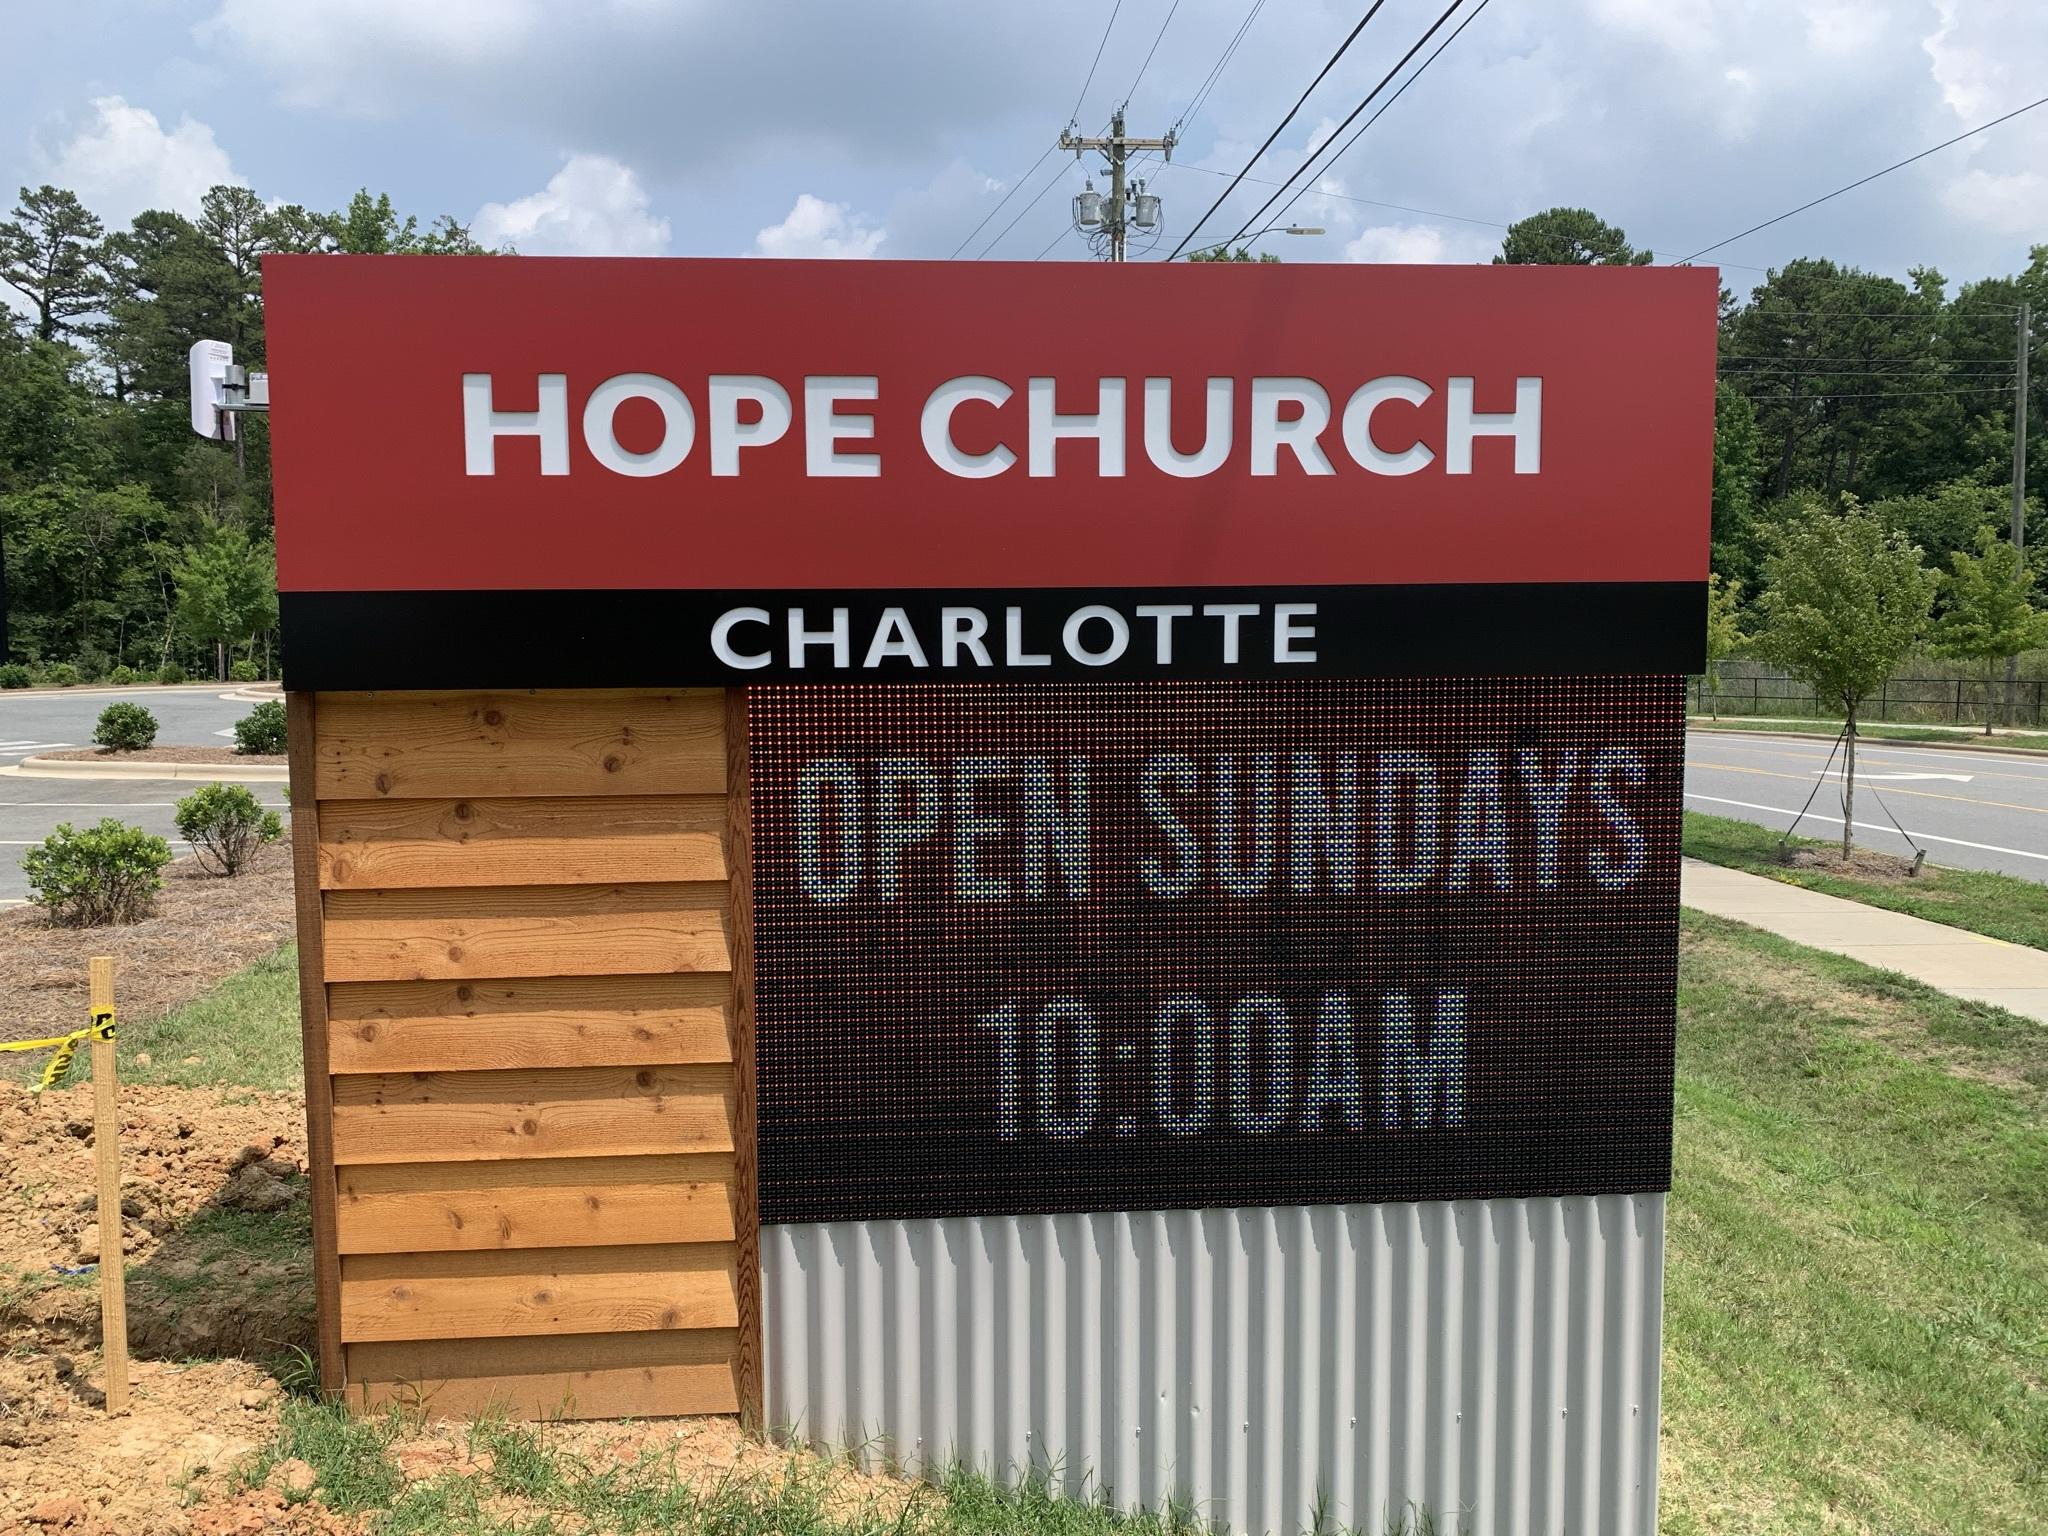 Hope Church Message Board in Charlotte, NC